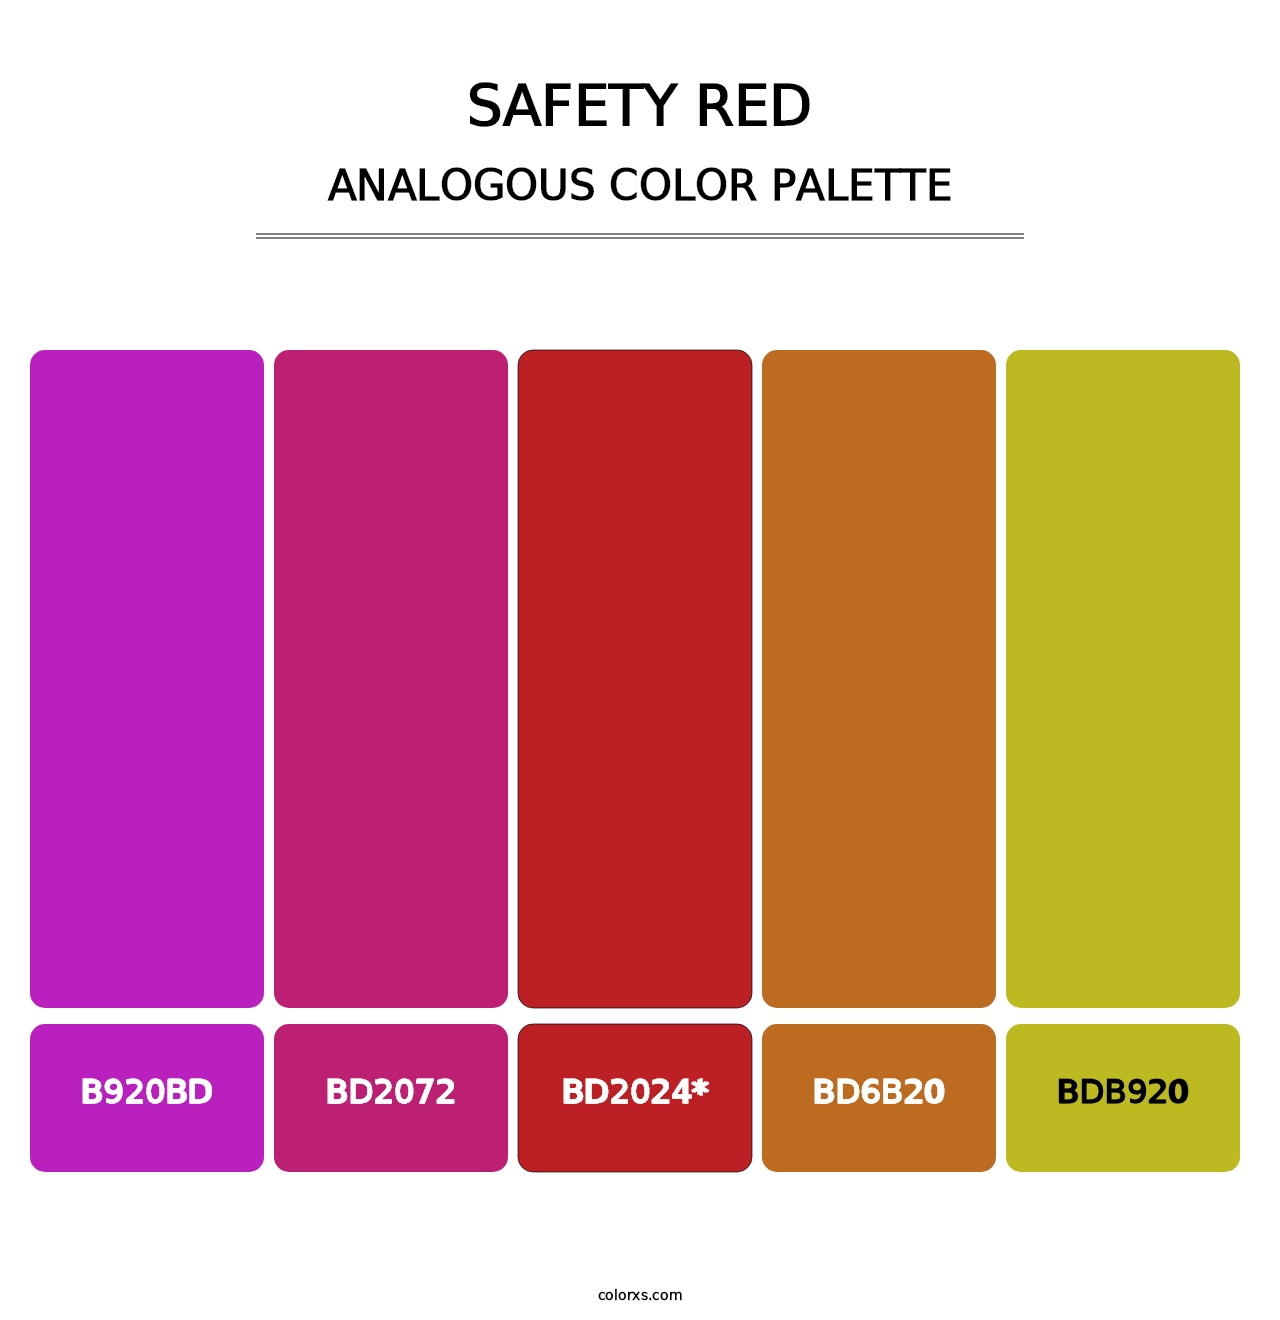 Safety Red - Analogous Color Palette